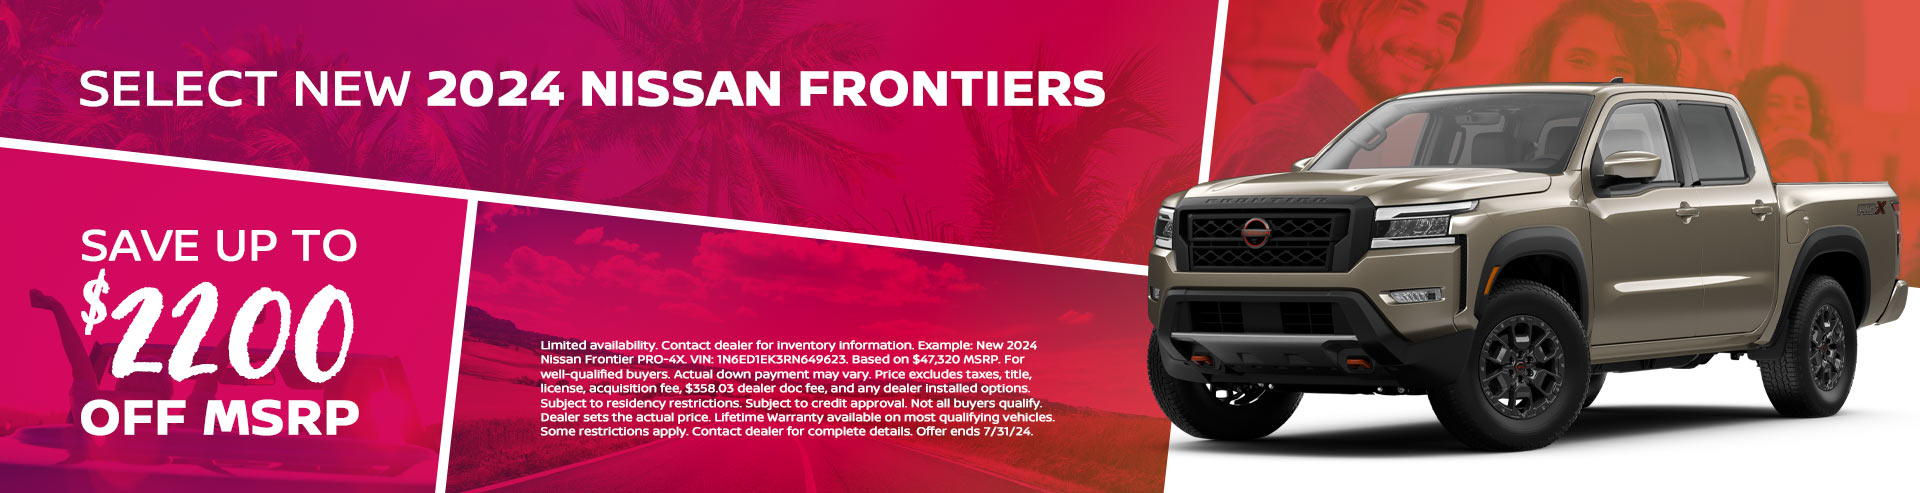 Save up to $2,200 off MSRP on select New 2024 Nissan Frontiers